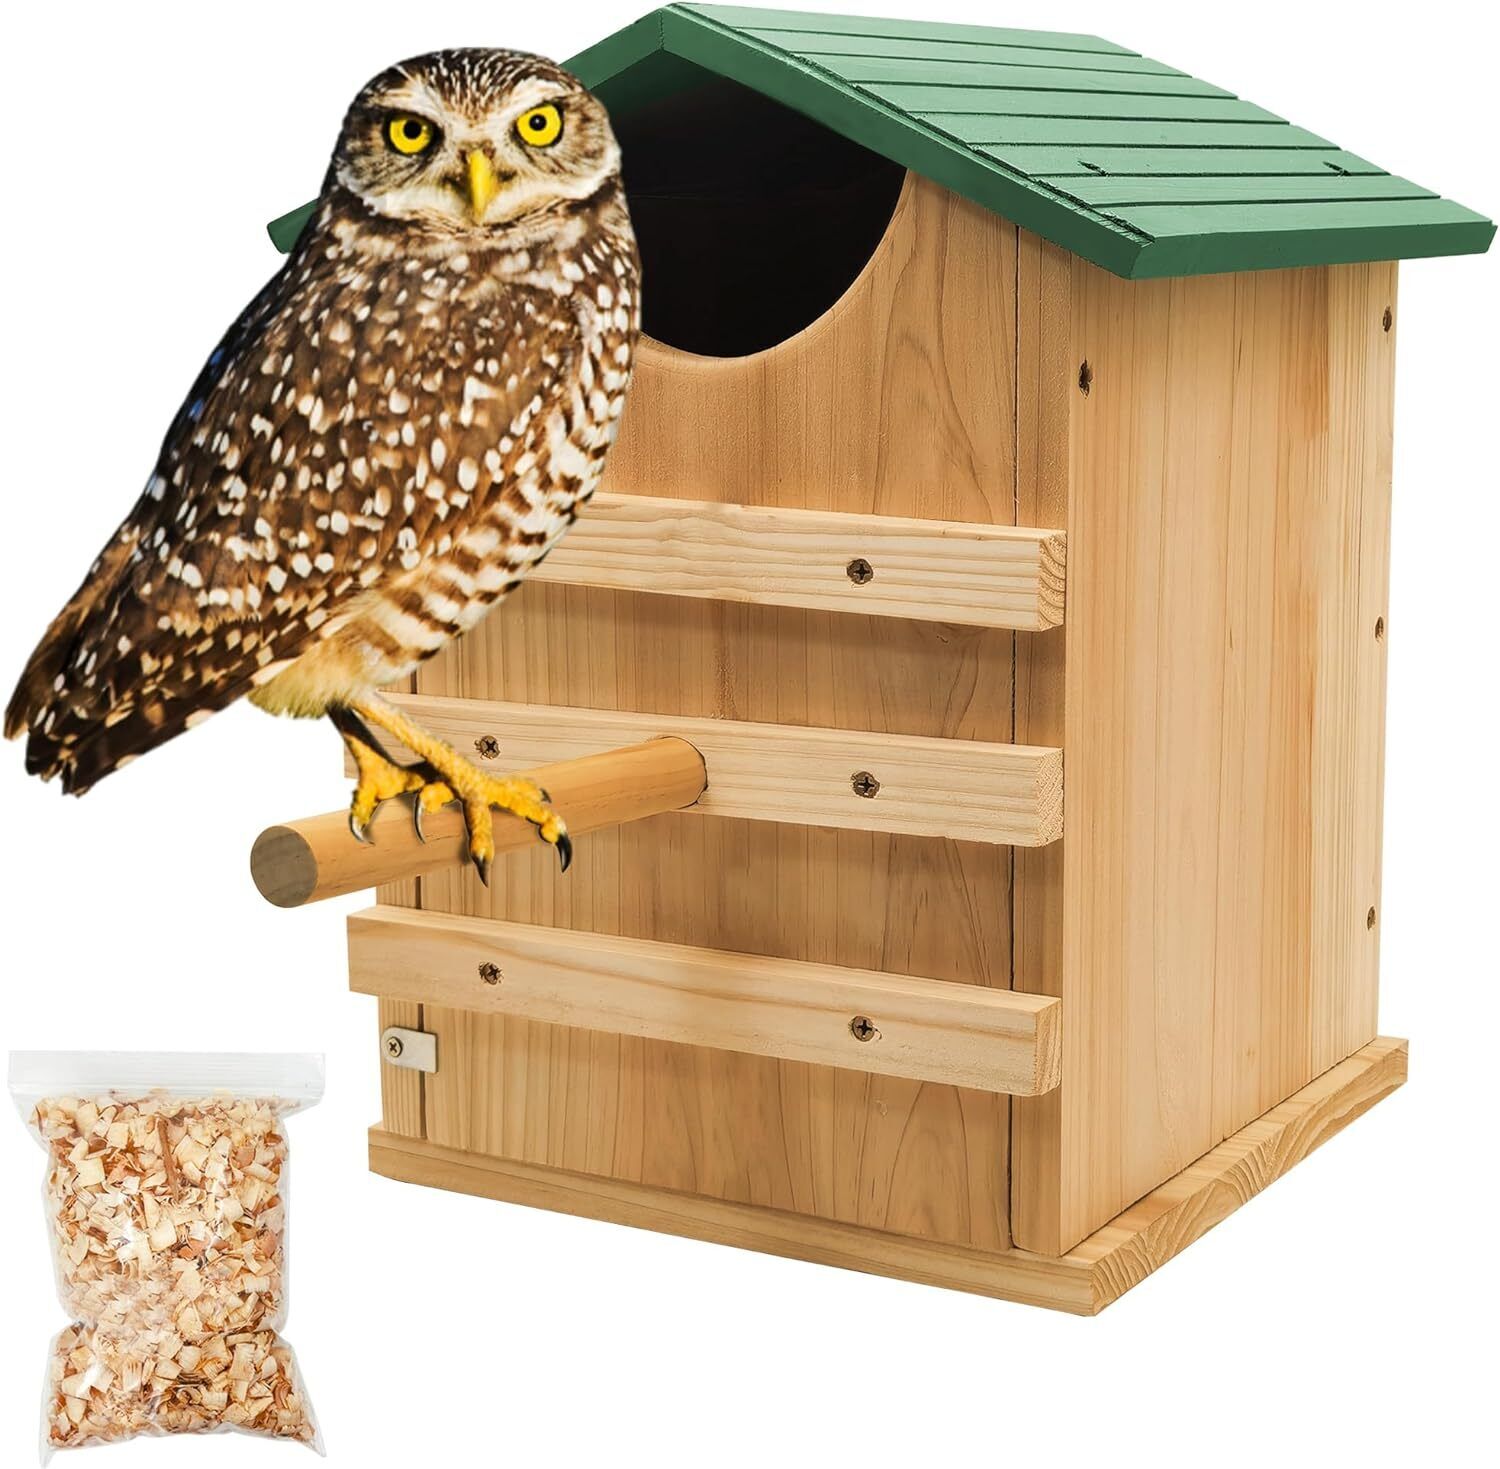 Screech Owl House Hand Made 14 x 10 Inch with Bird Stand Design